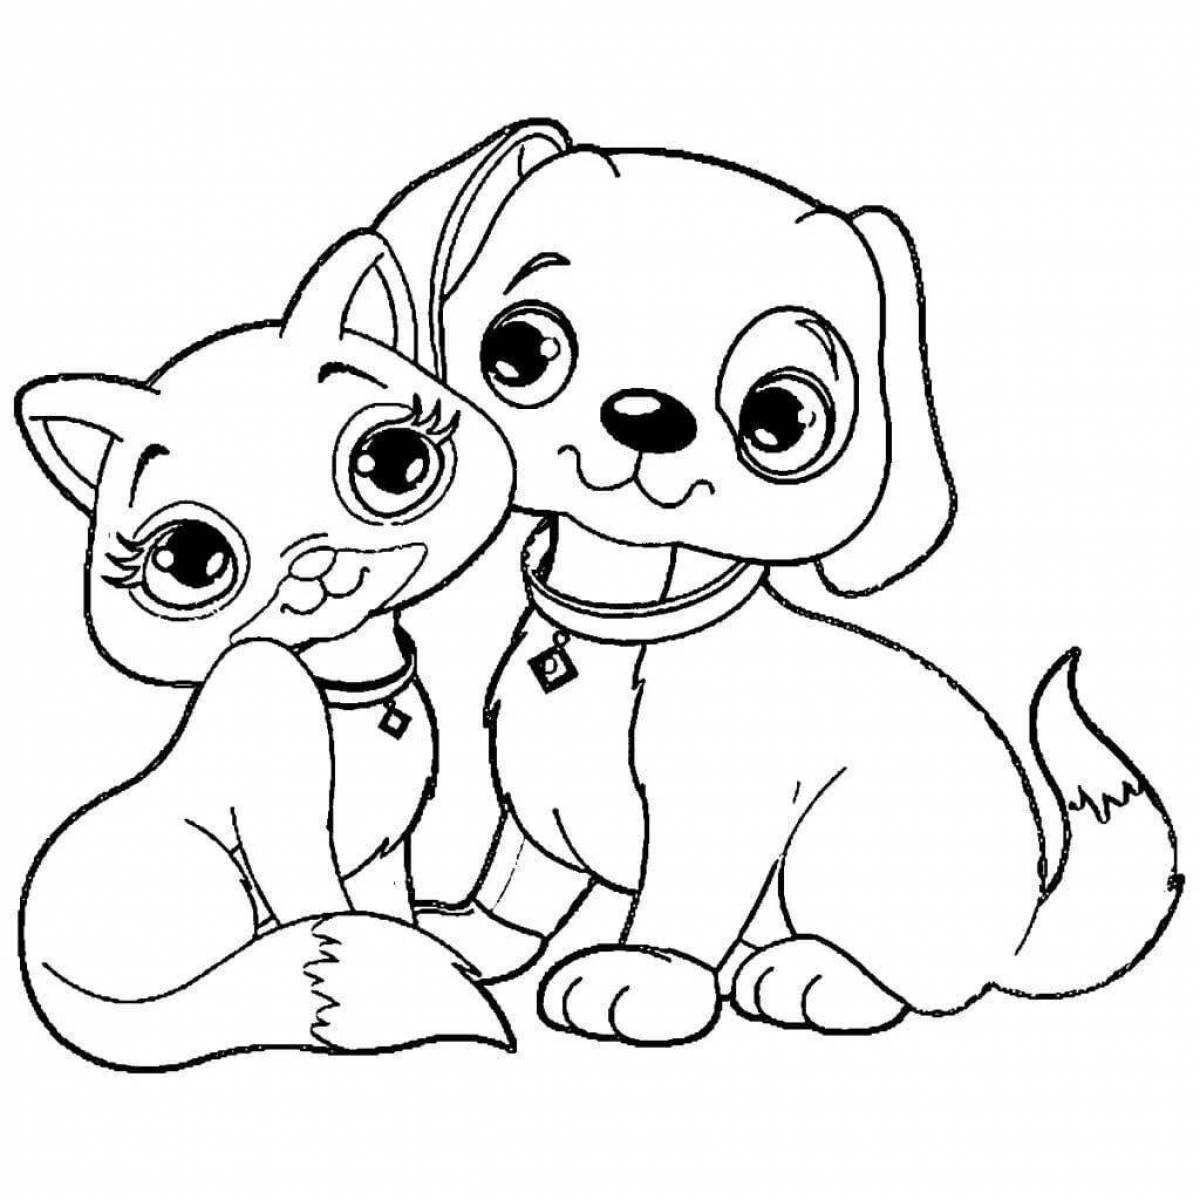 Precious cute dog coloring book for girls